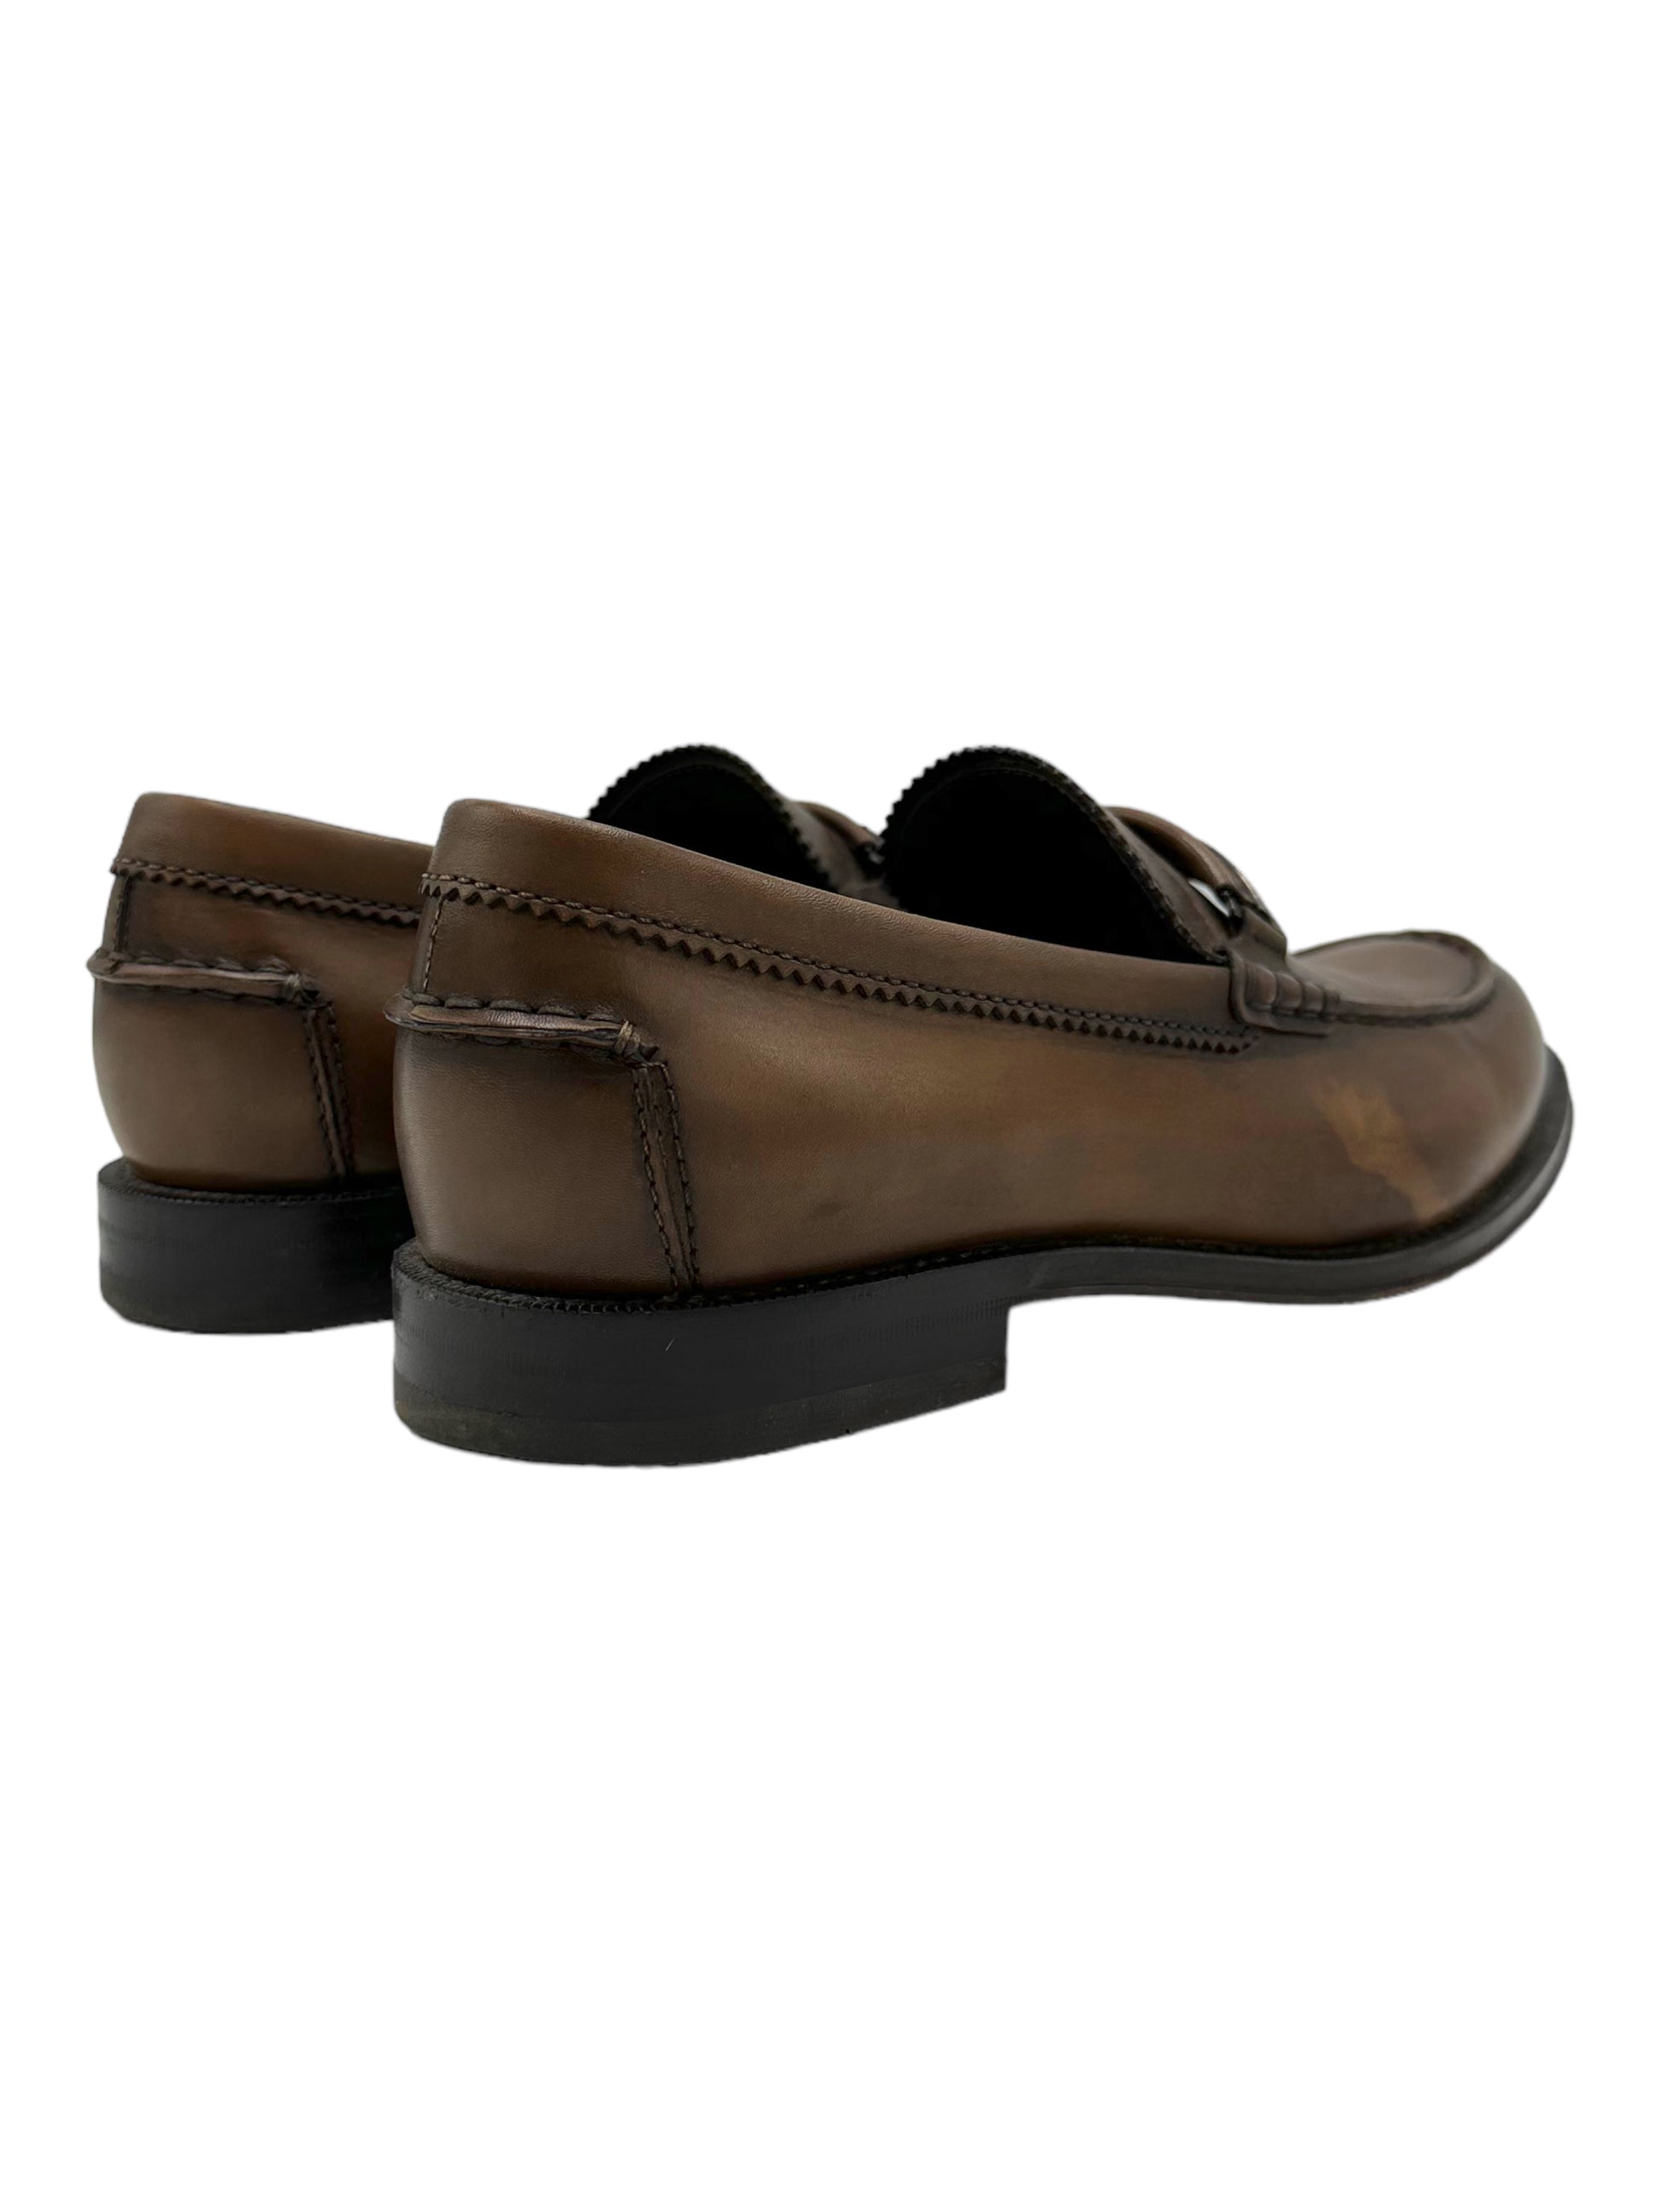 Tods Dark Brown Horsebit Leather Loafer - Genuine Design Luxury Consignment Calgary, Alberta, Canada New and Pre-Owned Clothing, Shoes, Accessories.